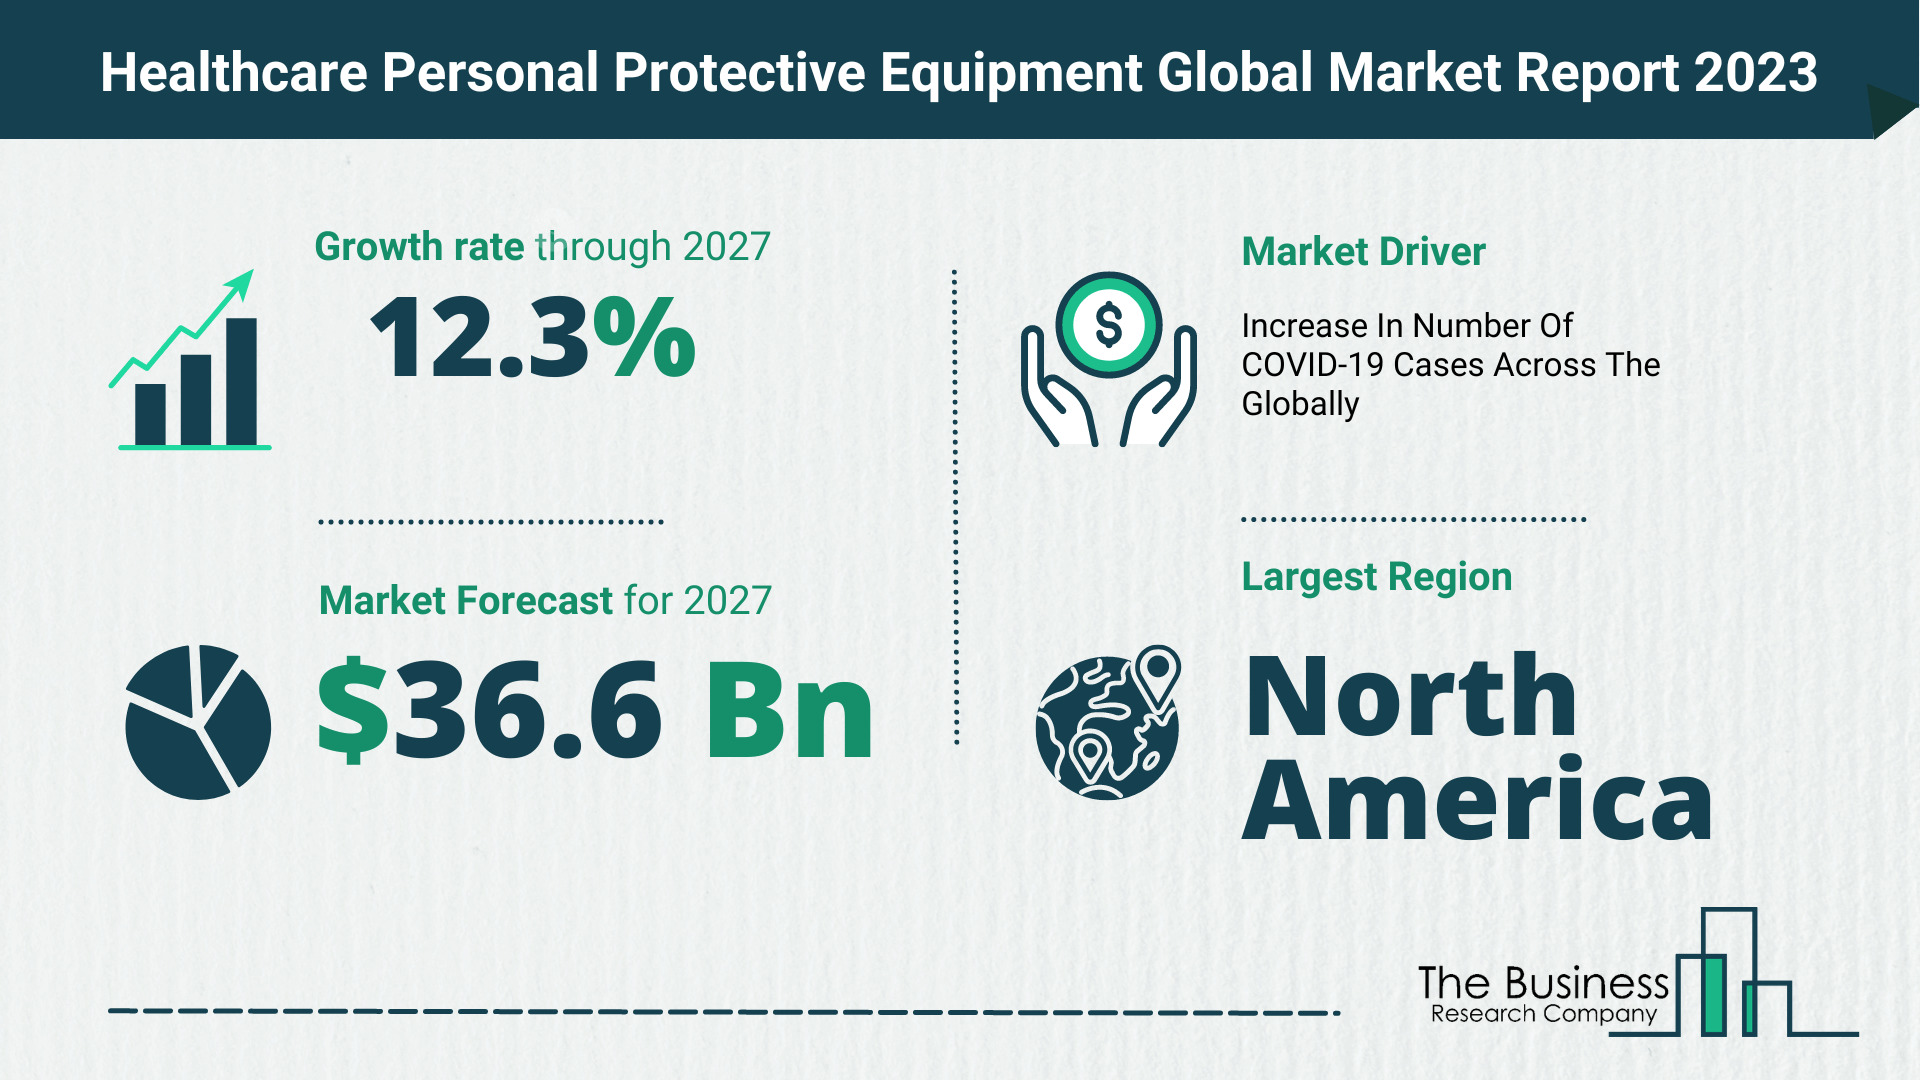 Healthcare Personal Protective Equipment Market Size, Share, And Growth Rate Analysis 2023